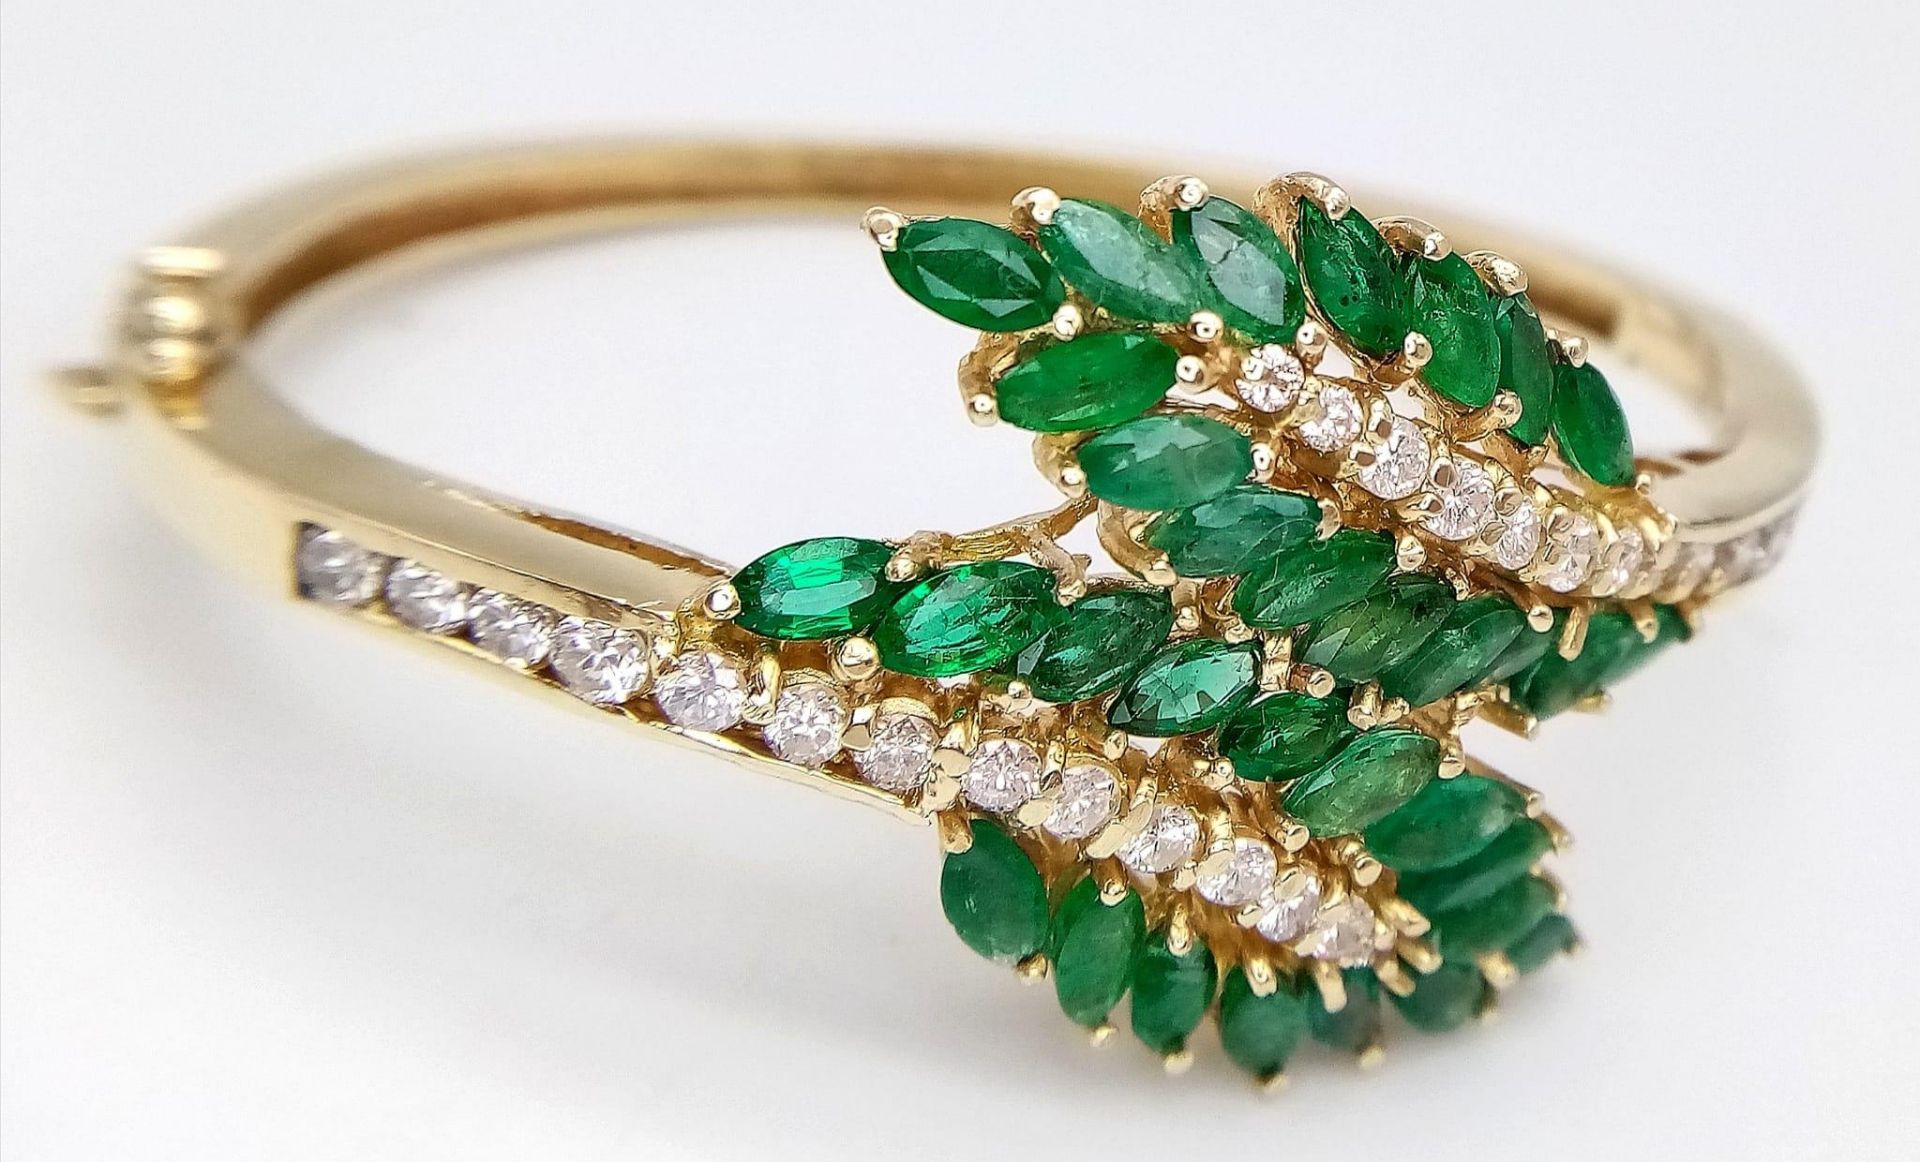 A DIAMOND AND EMERALD LEAF DESIGN BANGLE IN CROSSOVER STYLE SET IN18K GOLD . 33.5gms 10457 - Image 2 of 15